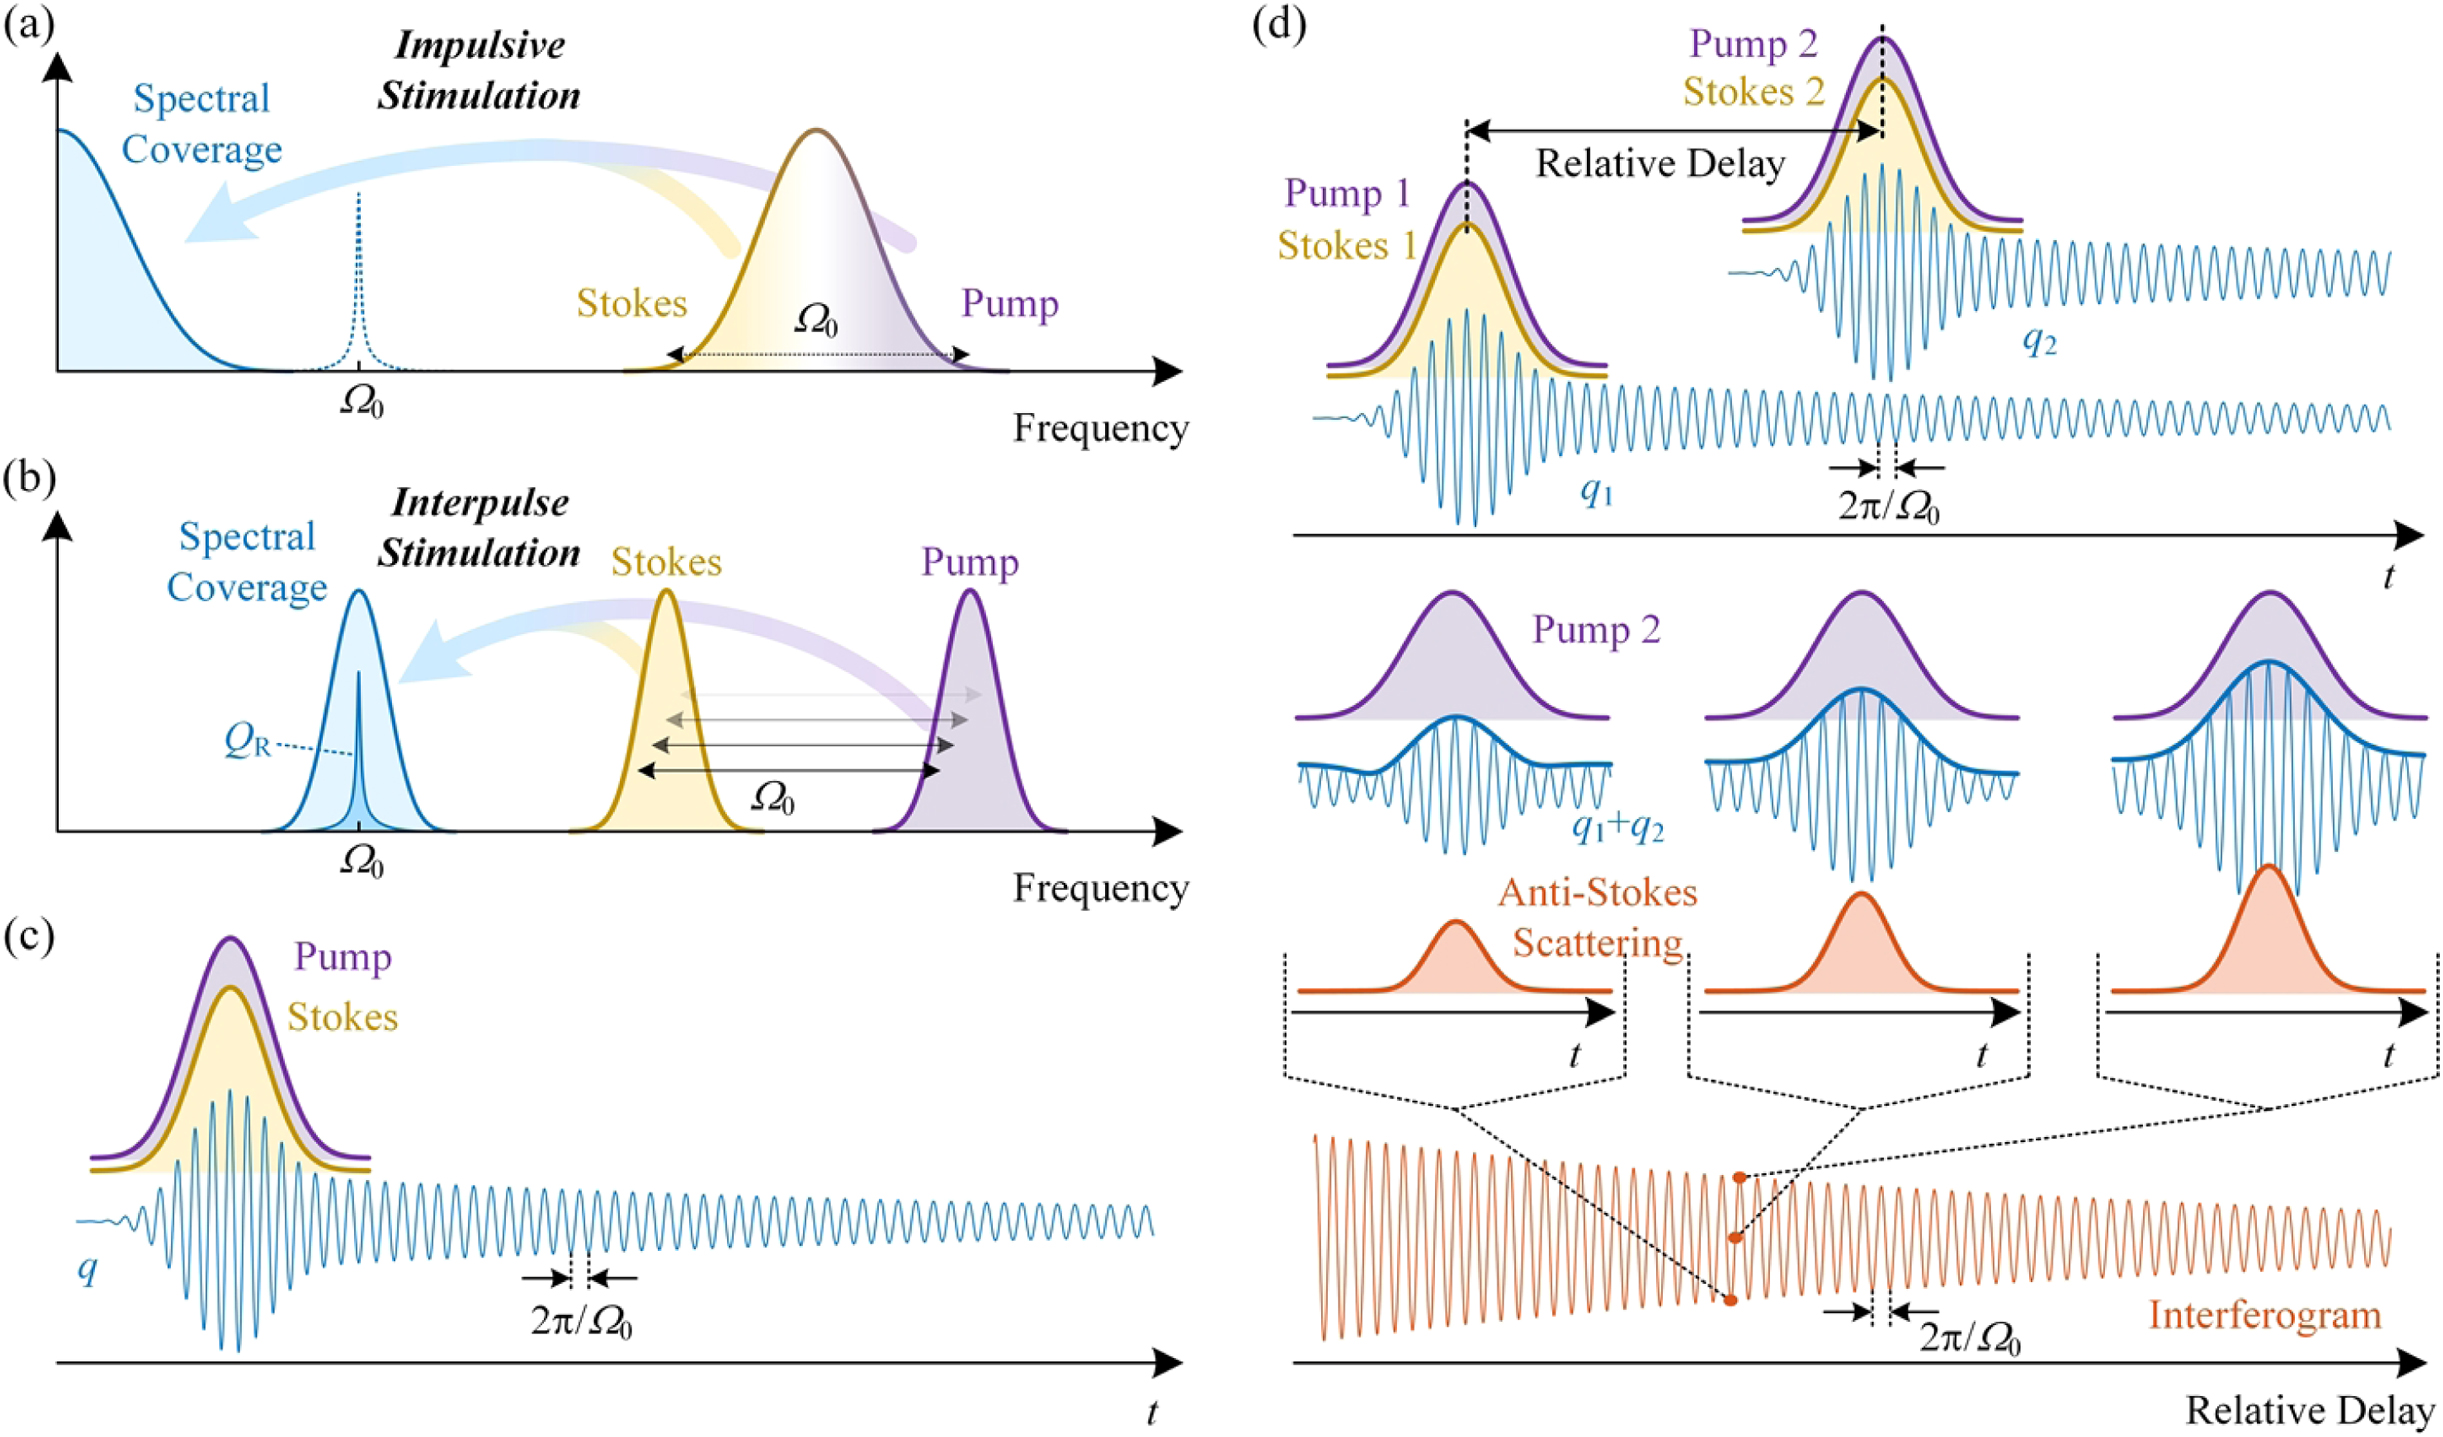 Comparison of (a) impulsive stimulation and (b) interpulse stimulation in the frequency domain. (c) Interpulse stimulation in the time domain. (d) Principle of interpulse stimulation FT-CARS.